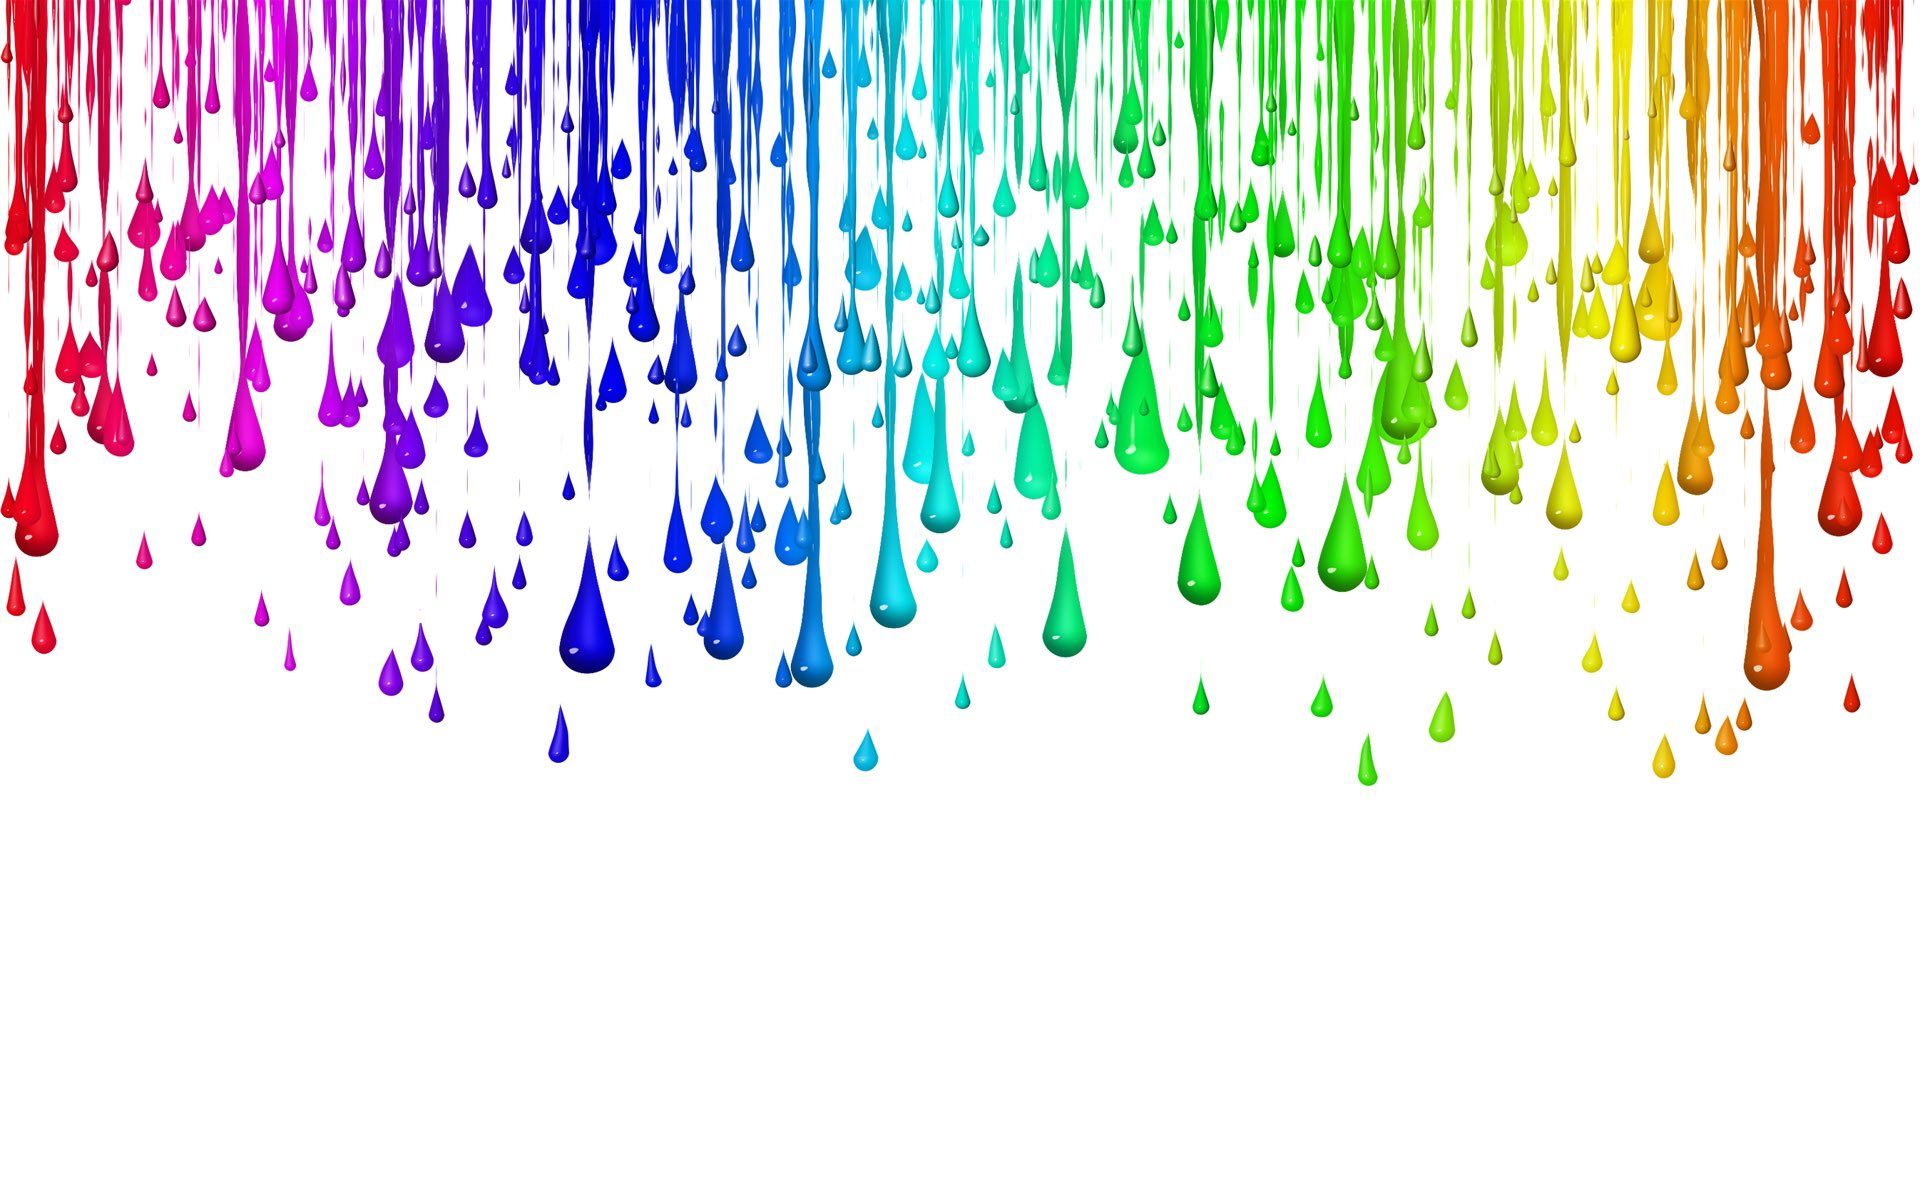 Colorful Drops of Water Wallpaper Background Wallpaper HD. Rainbow painting, Cool colorful background, Rainbow wallpaper